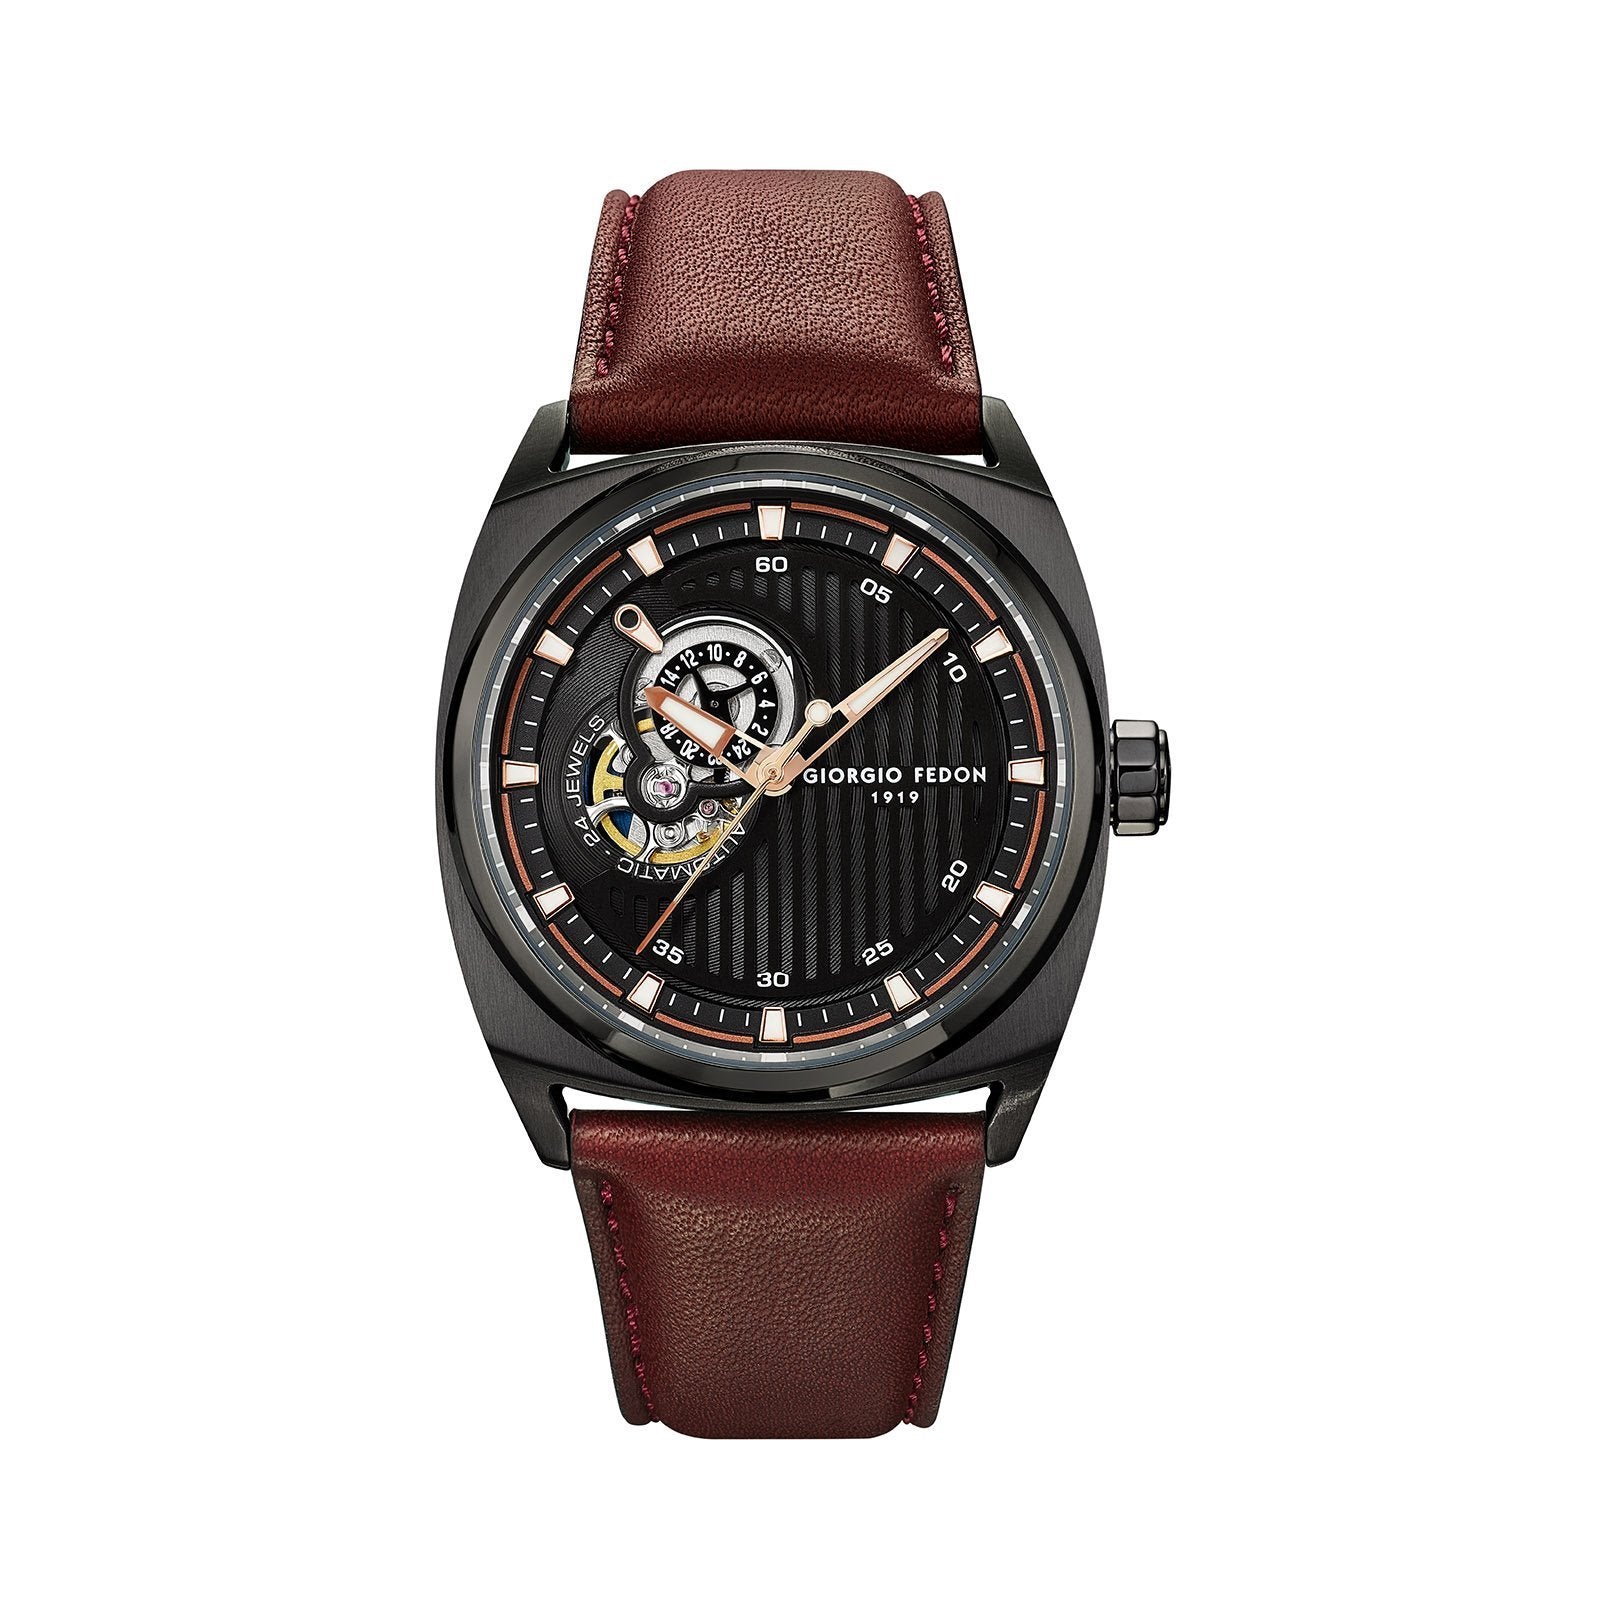 Giorgio Fedon Legend Brown Black PVD - Watches & Crystals